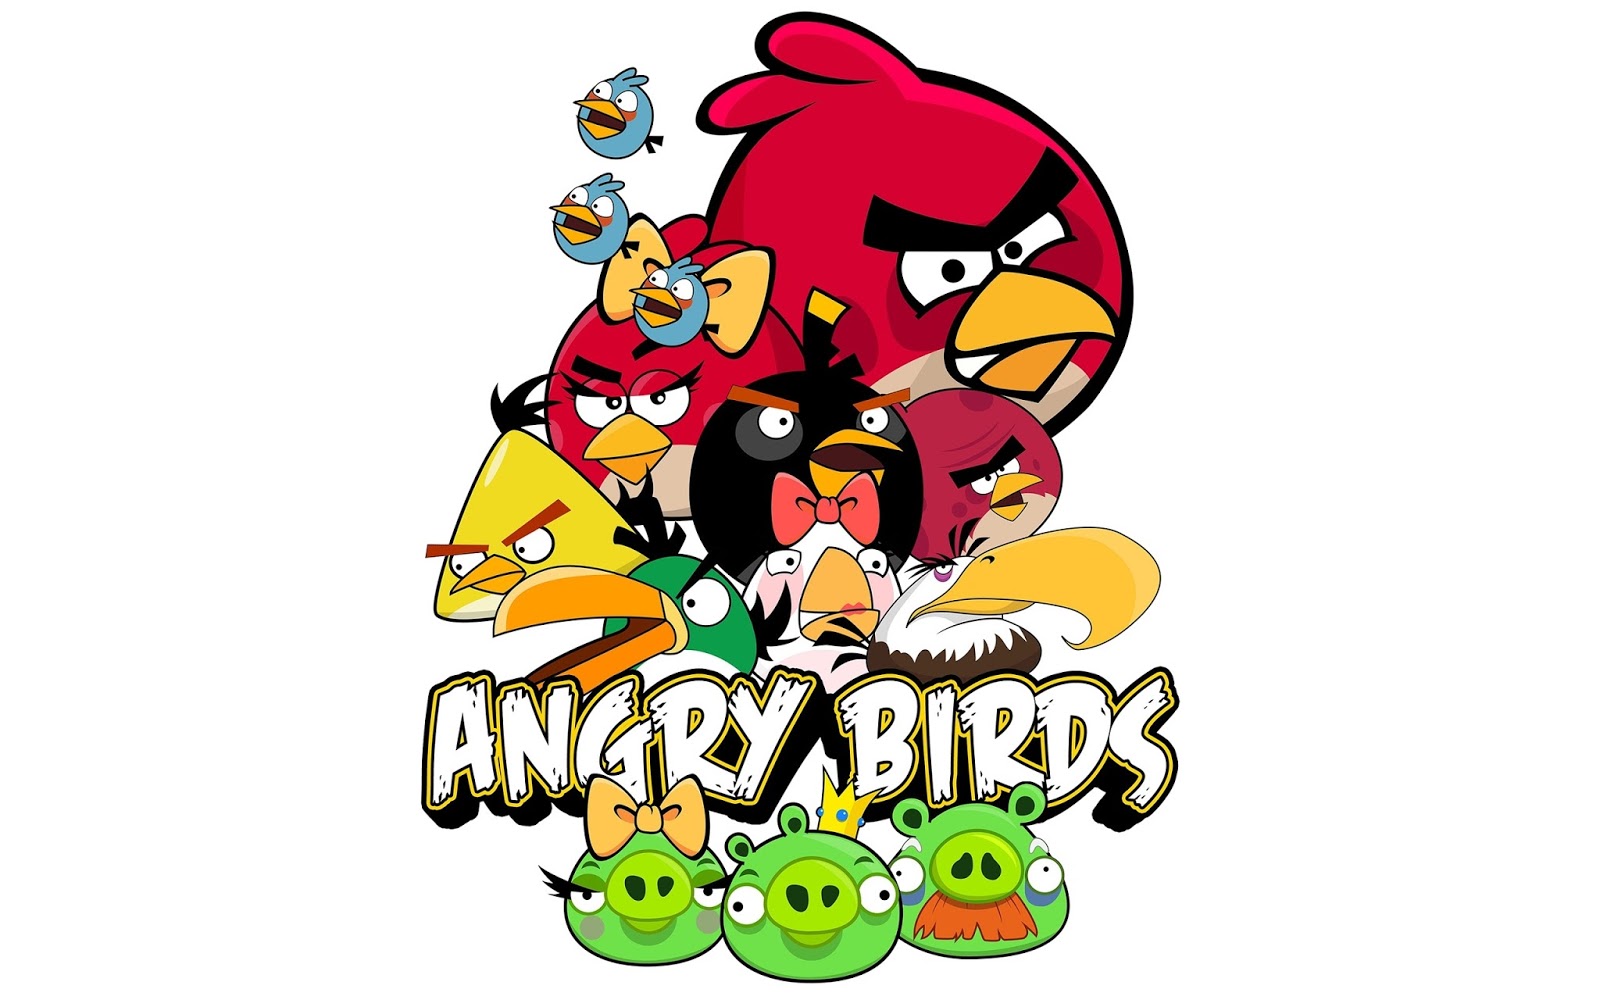 angry-birds-free-printable-backgrounds-invitations-or-cards-oh-my